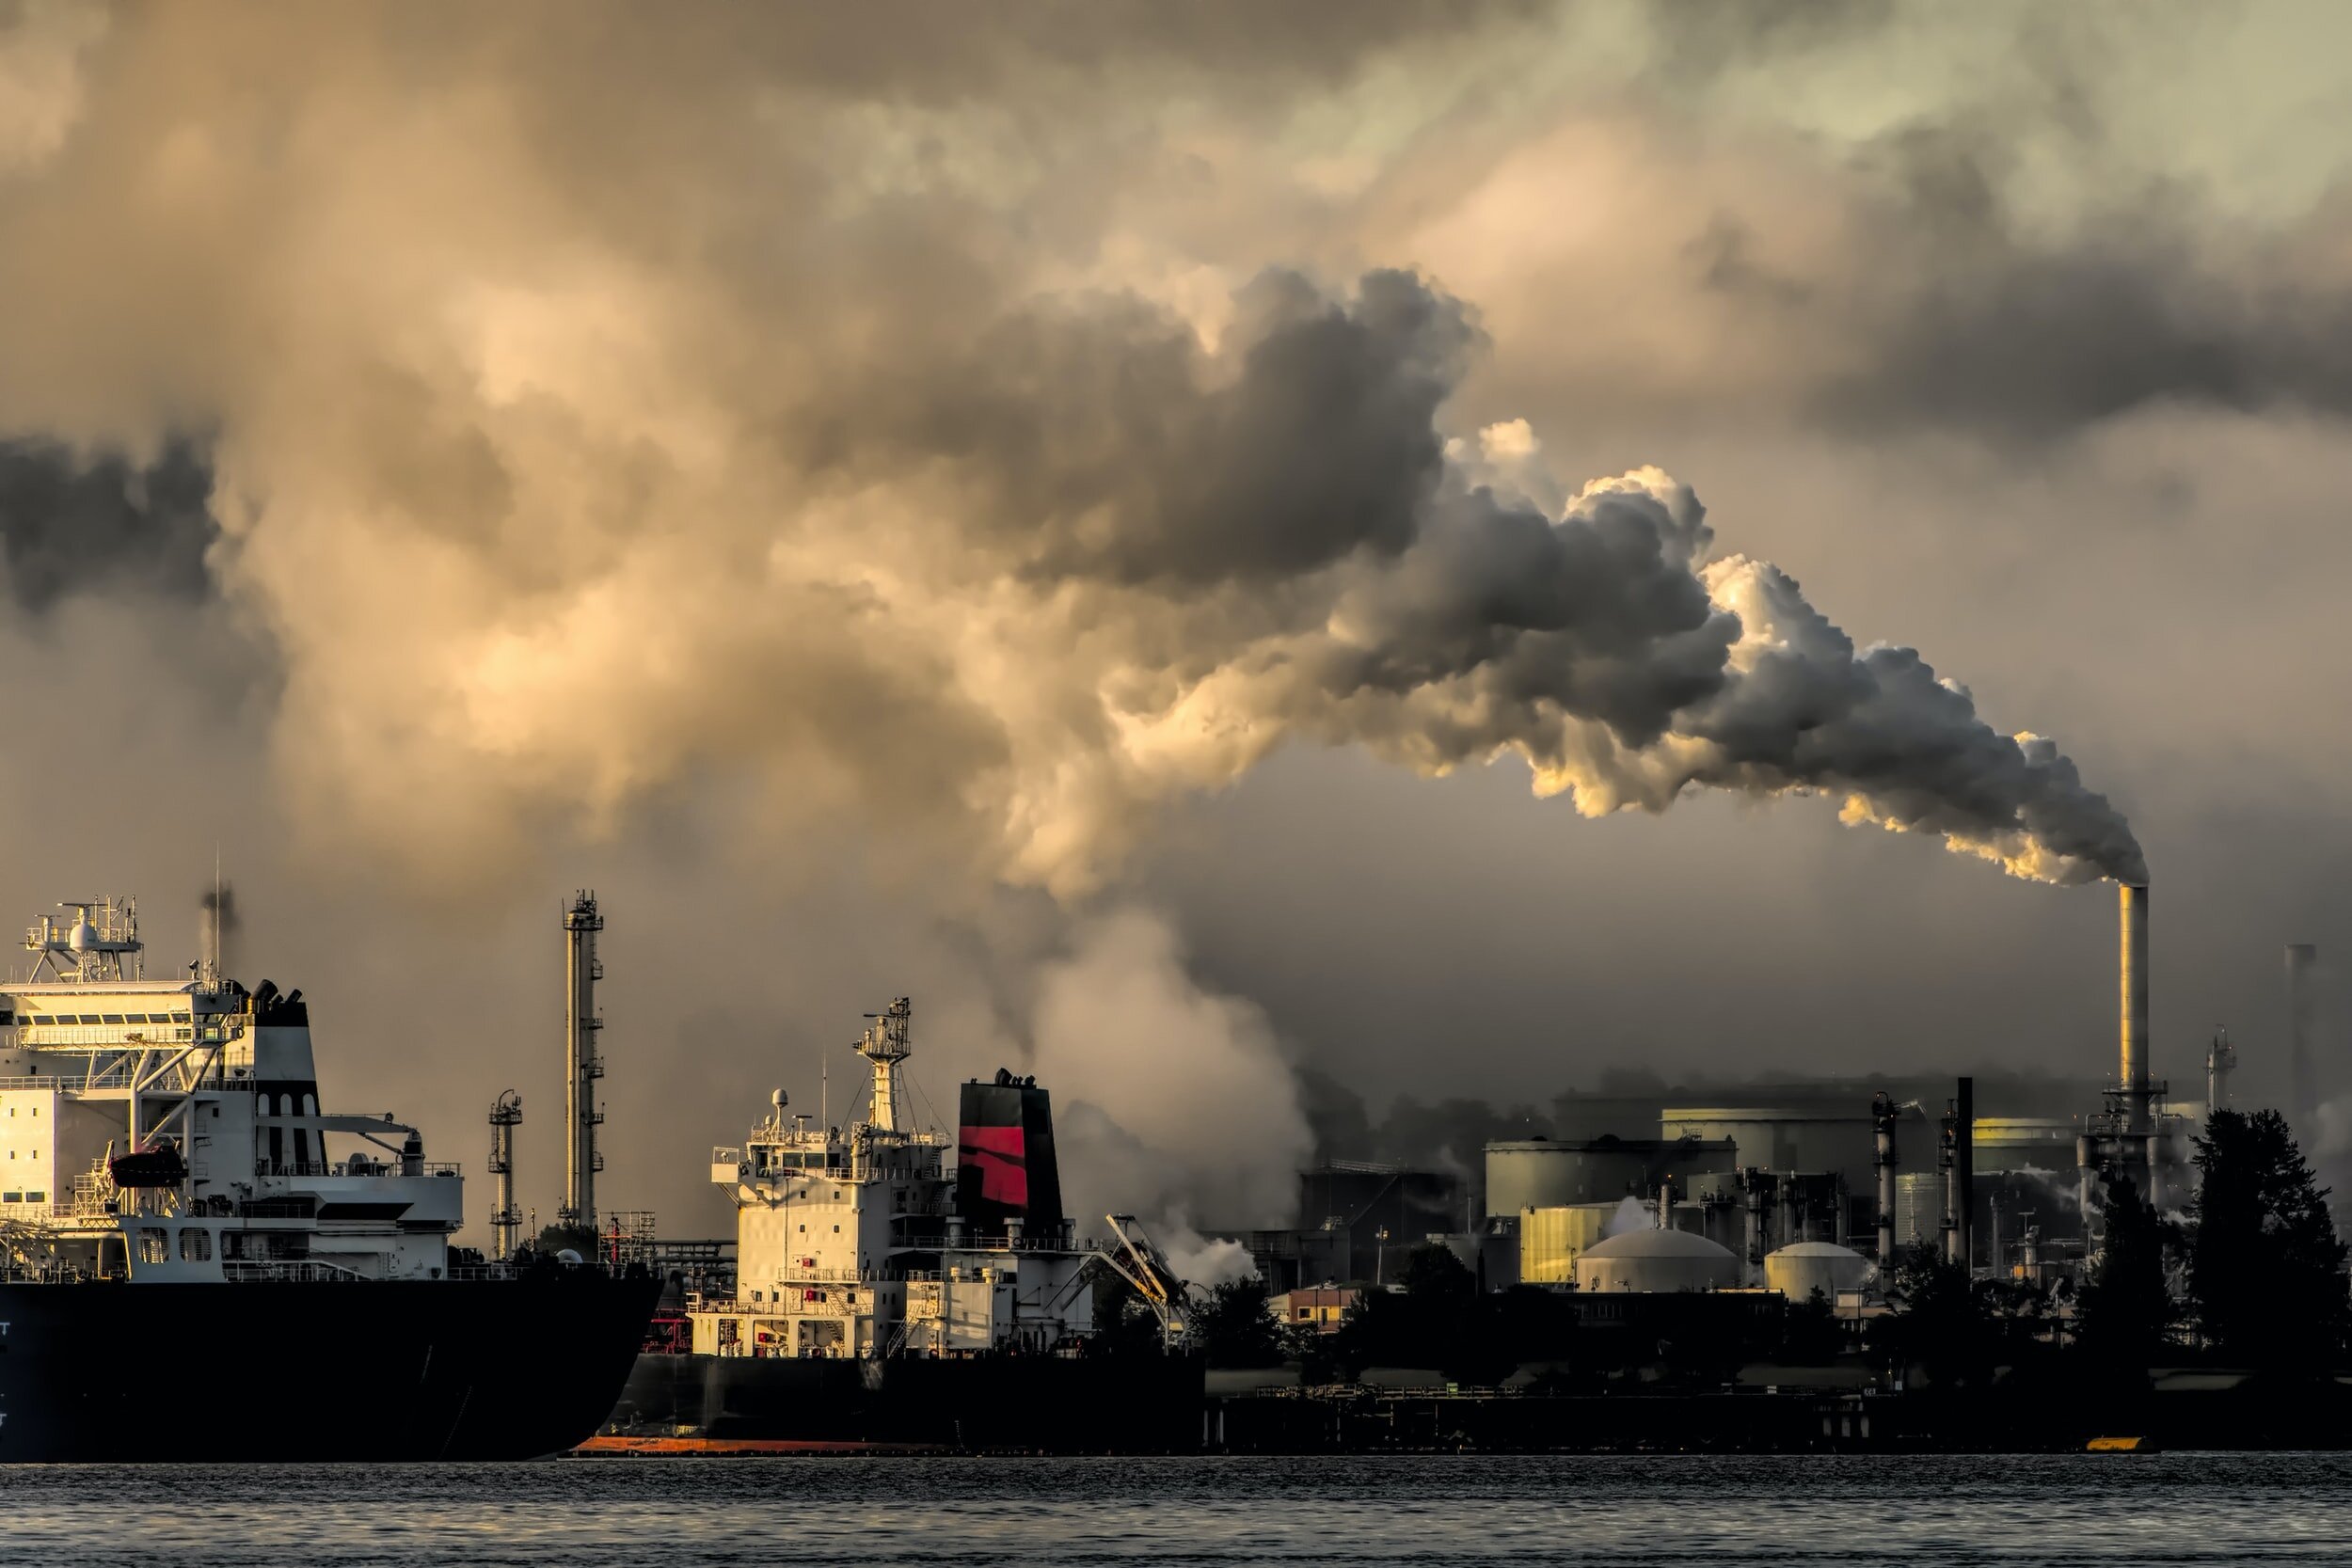 What are carbon emissions and where do they come from?